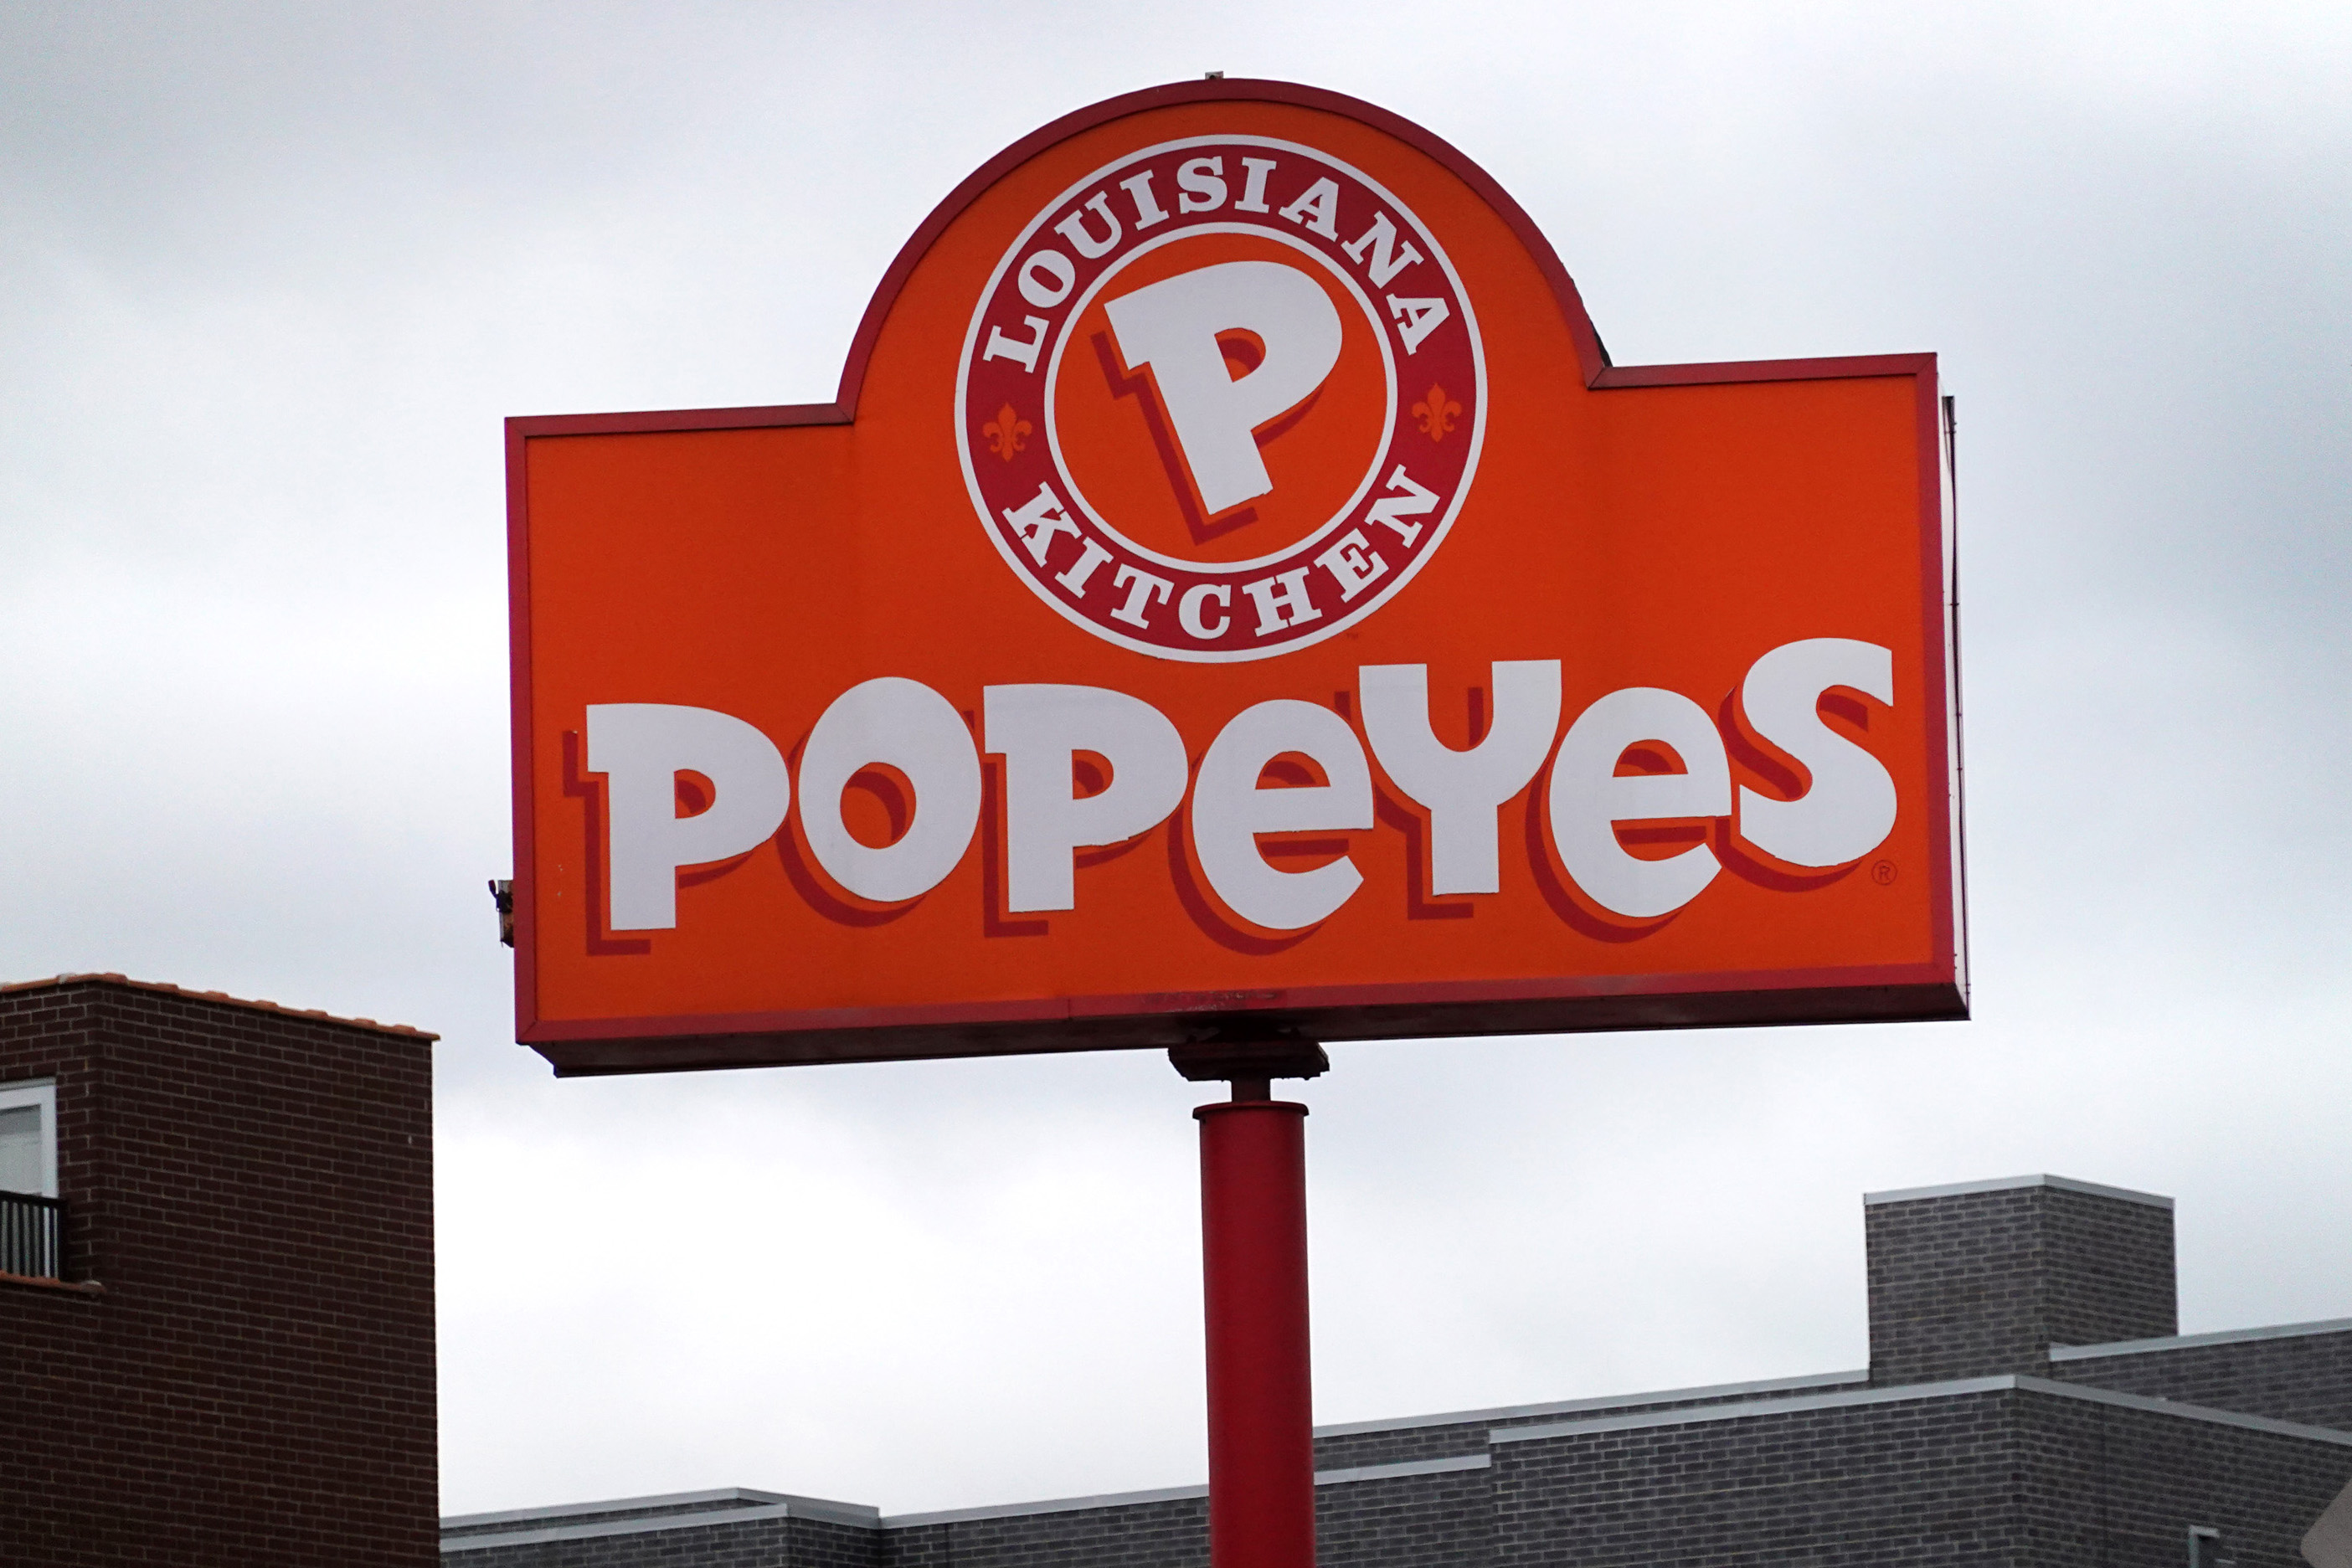 “Popeyes Meme Kid” Gets NIL Deal From The Fast Food Chain